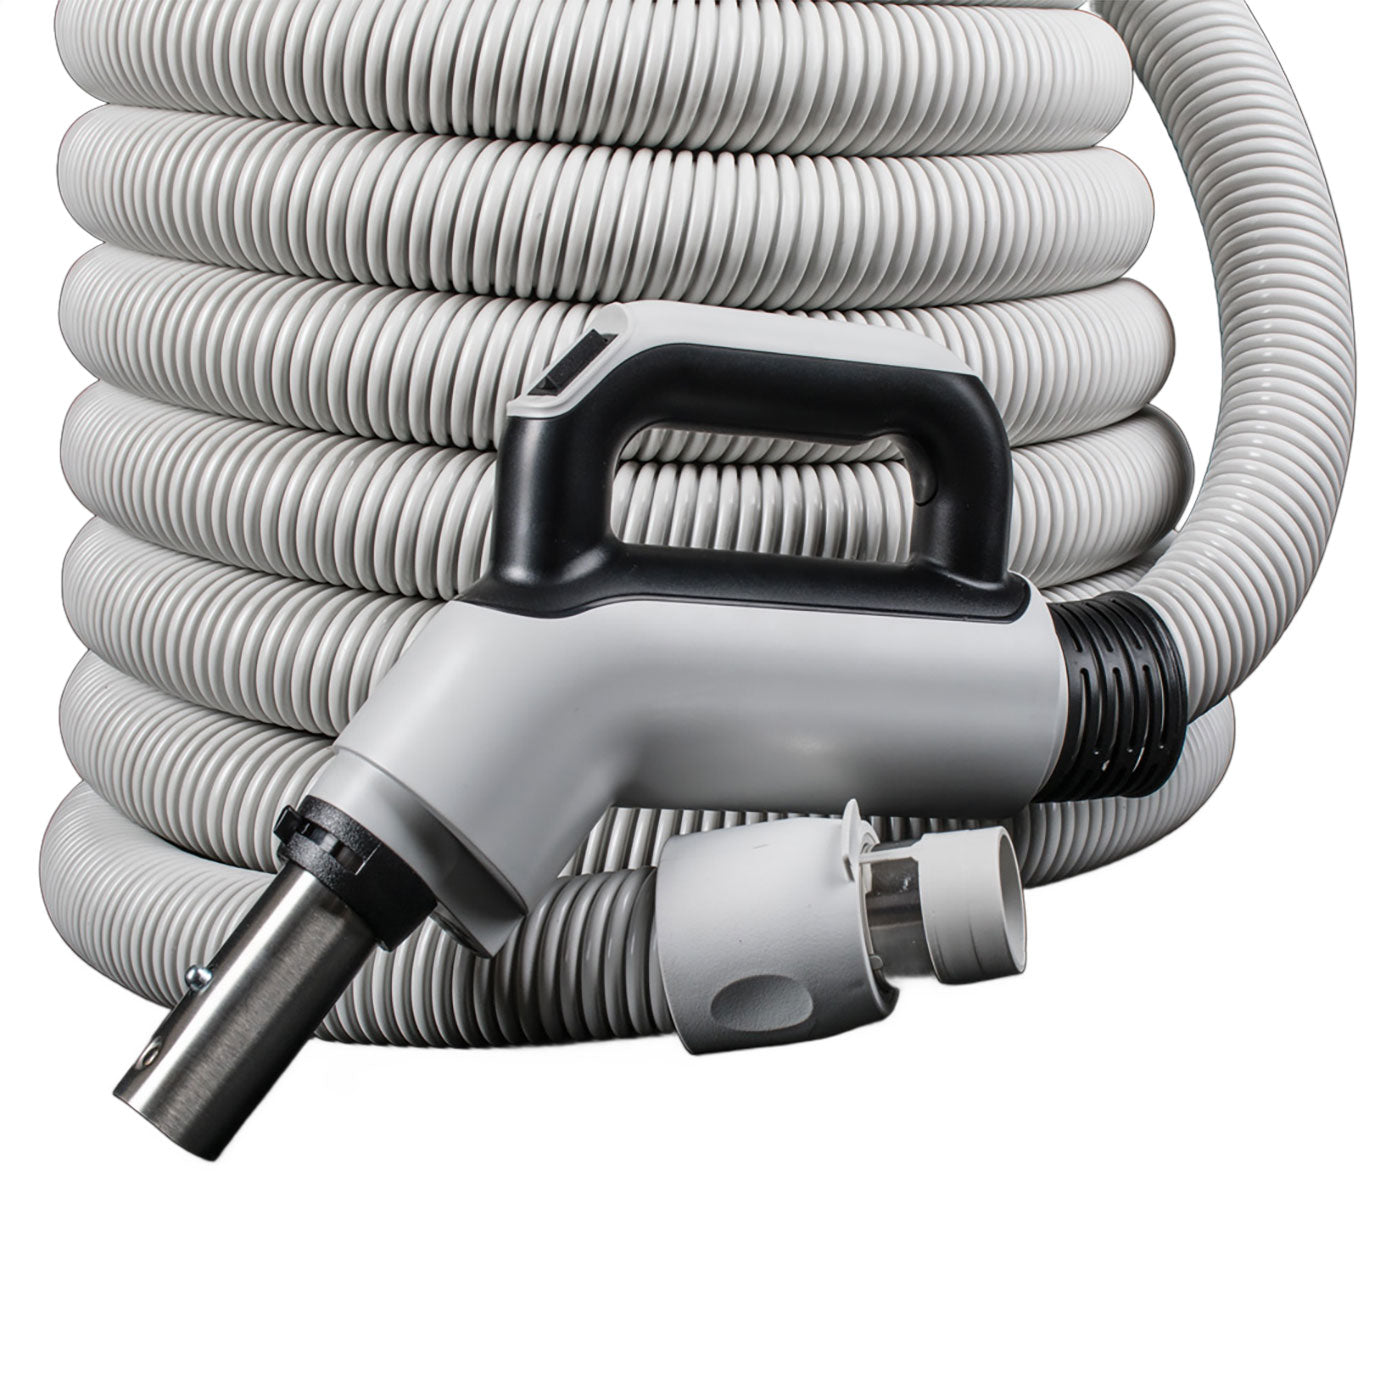 30 foot Low Voltage Central Vacuum Hose with on off switch